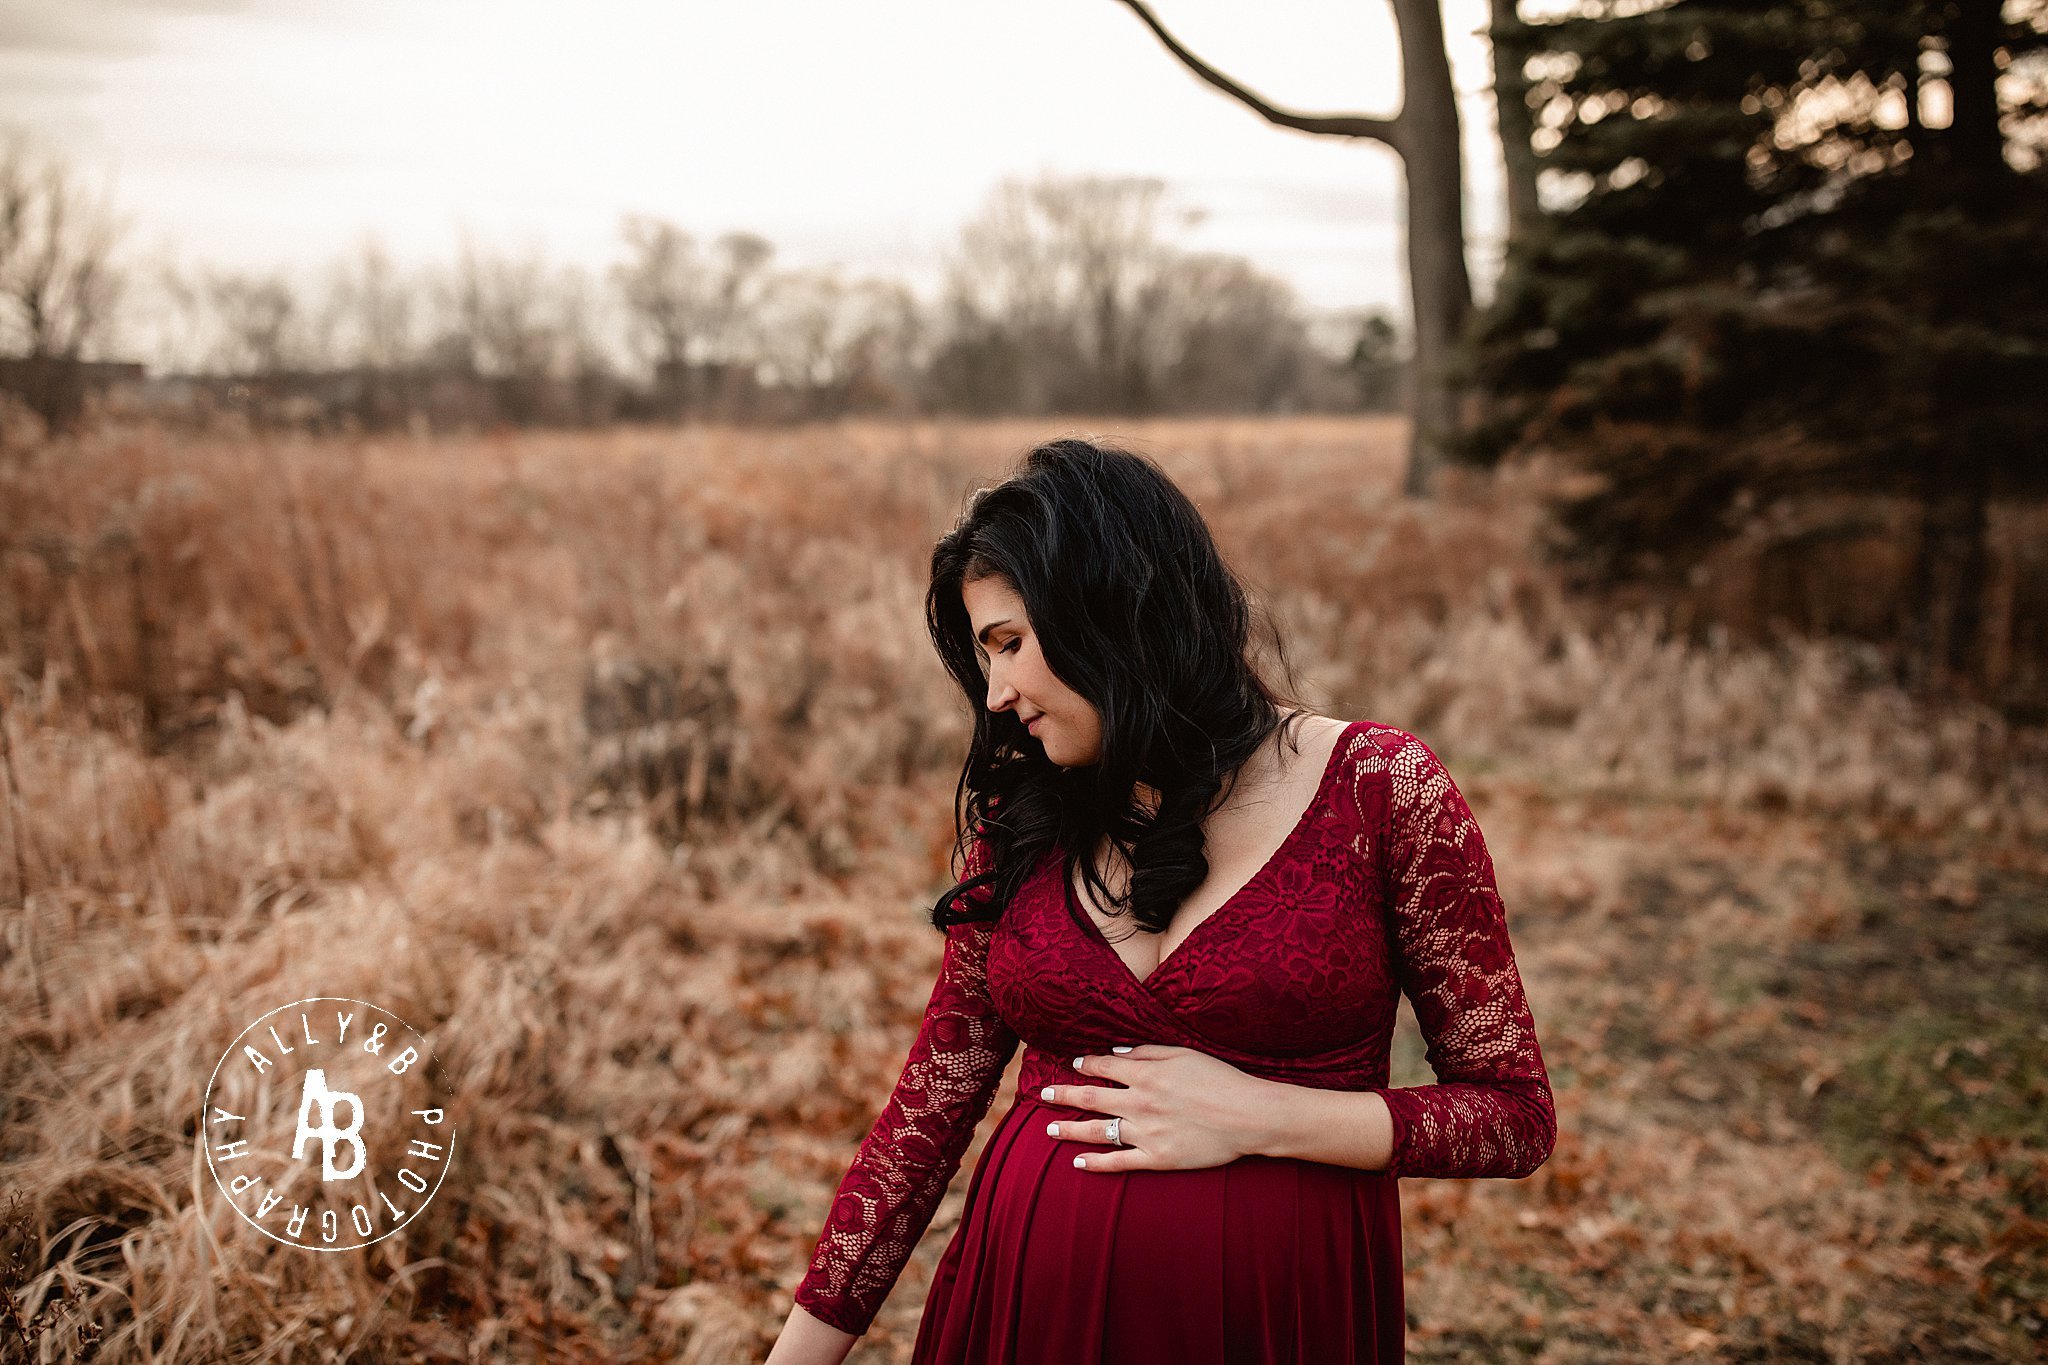 maternity photographers in naperville il.jpg